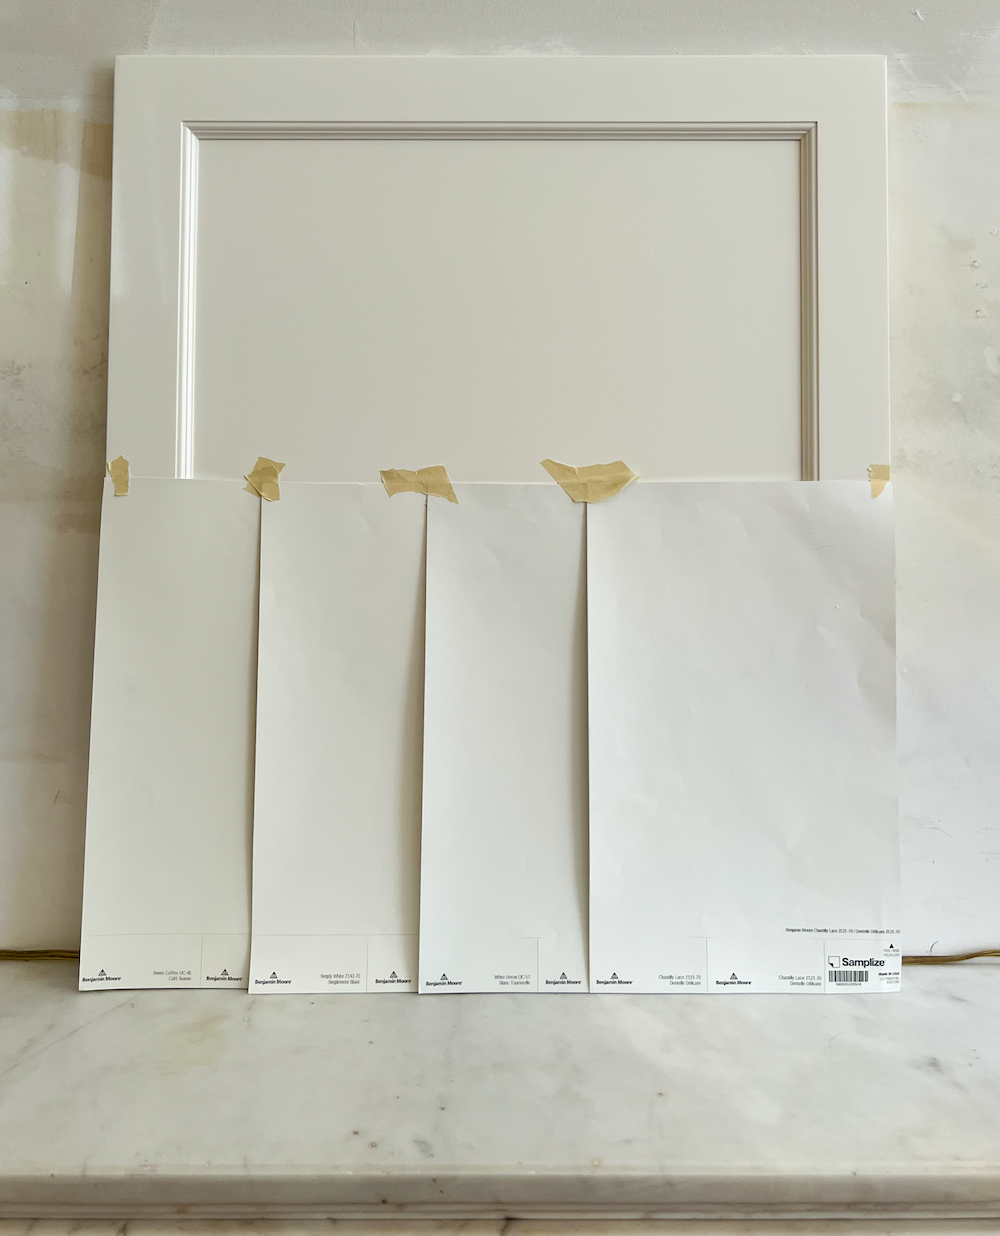 selecting paint colors - Sherwin Williams Greek Villa door with colors from Benjamin Moore - Swiss Coffee, Simply White, White Heron, and Chantilly Lace